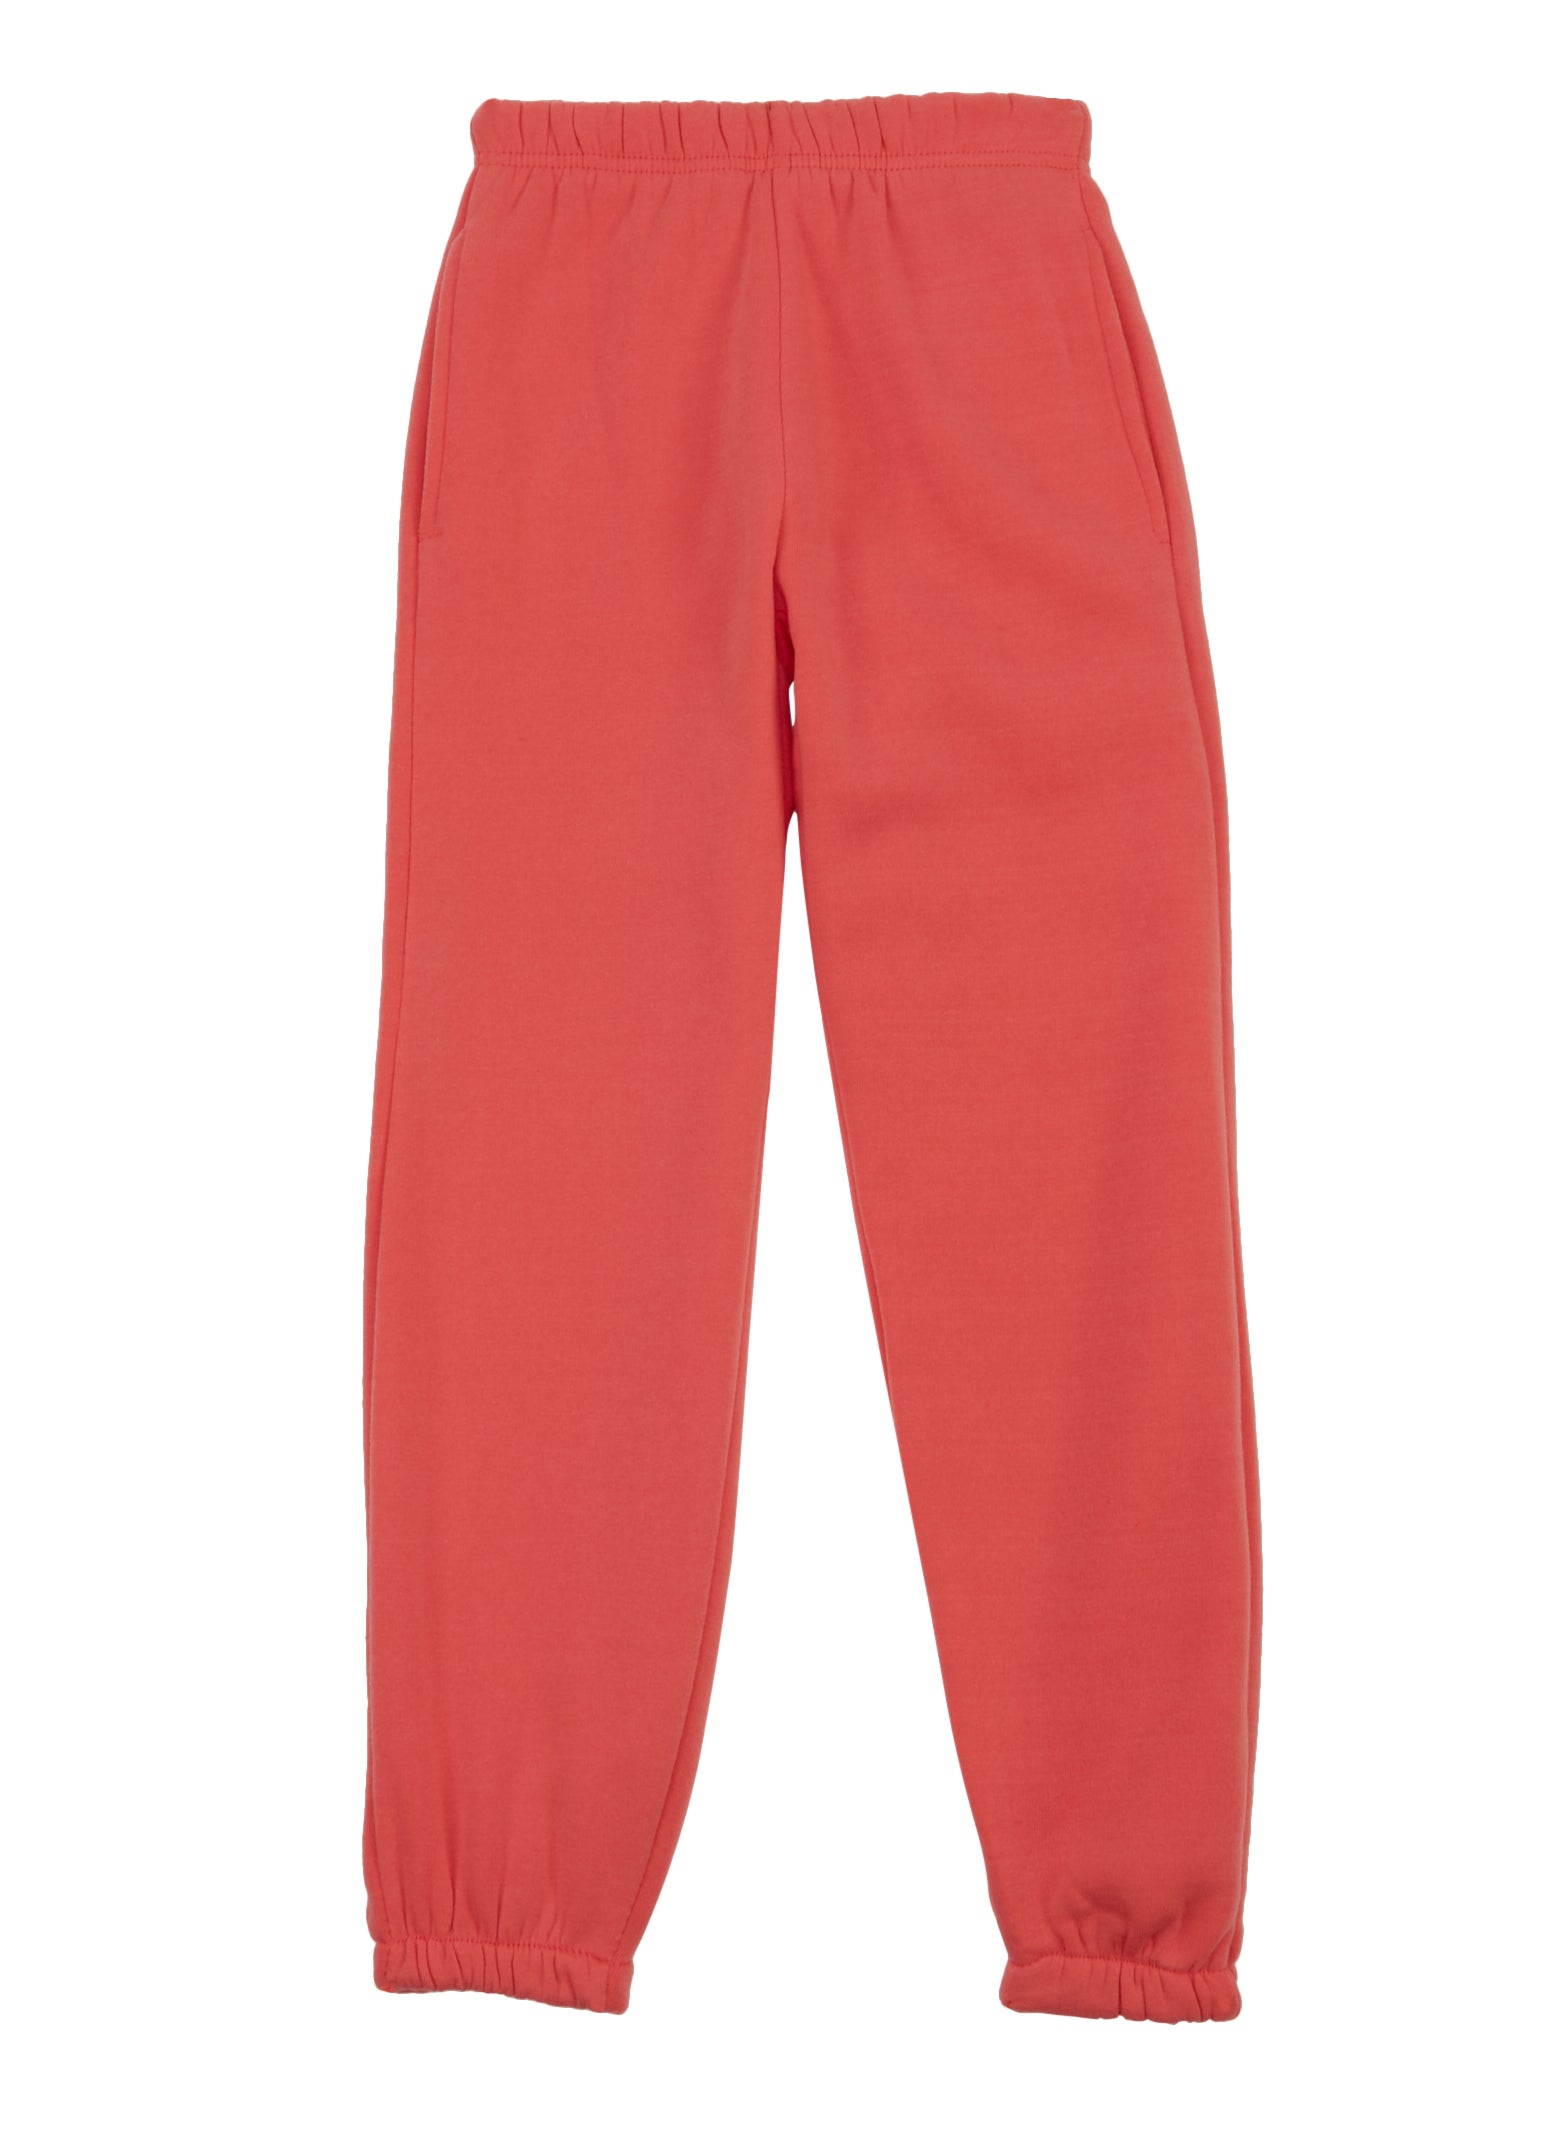 Girls Sweat Pants in Coral